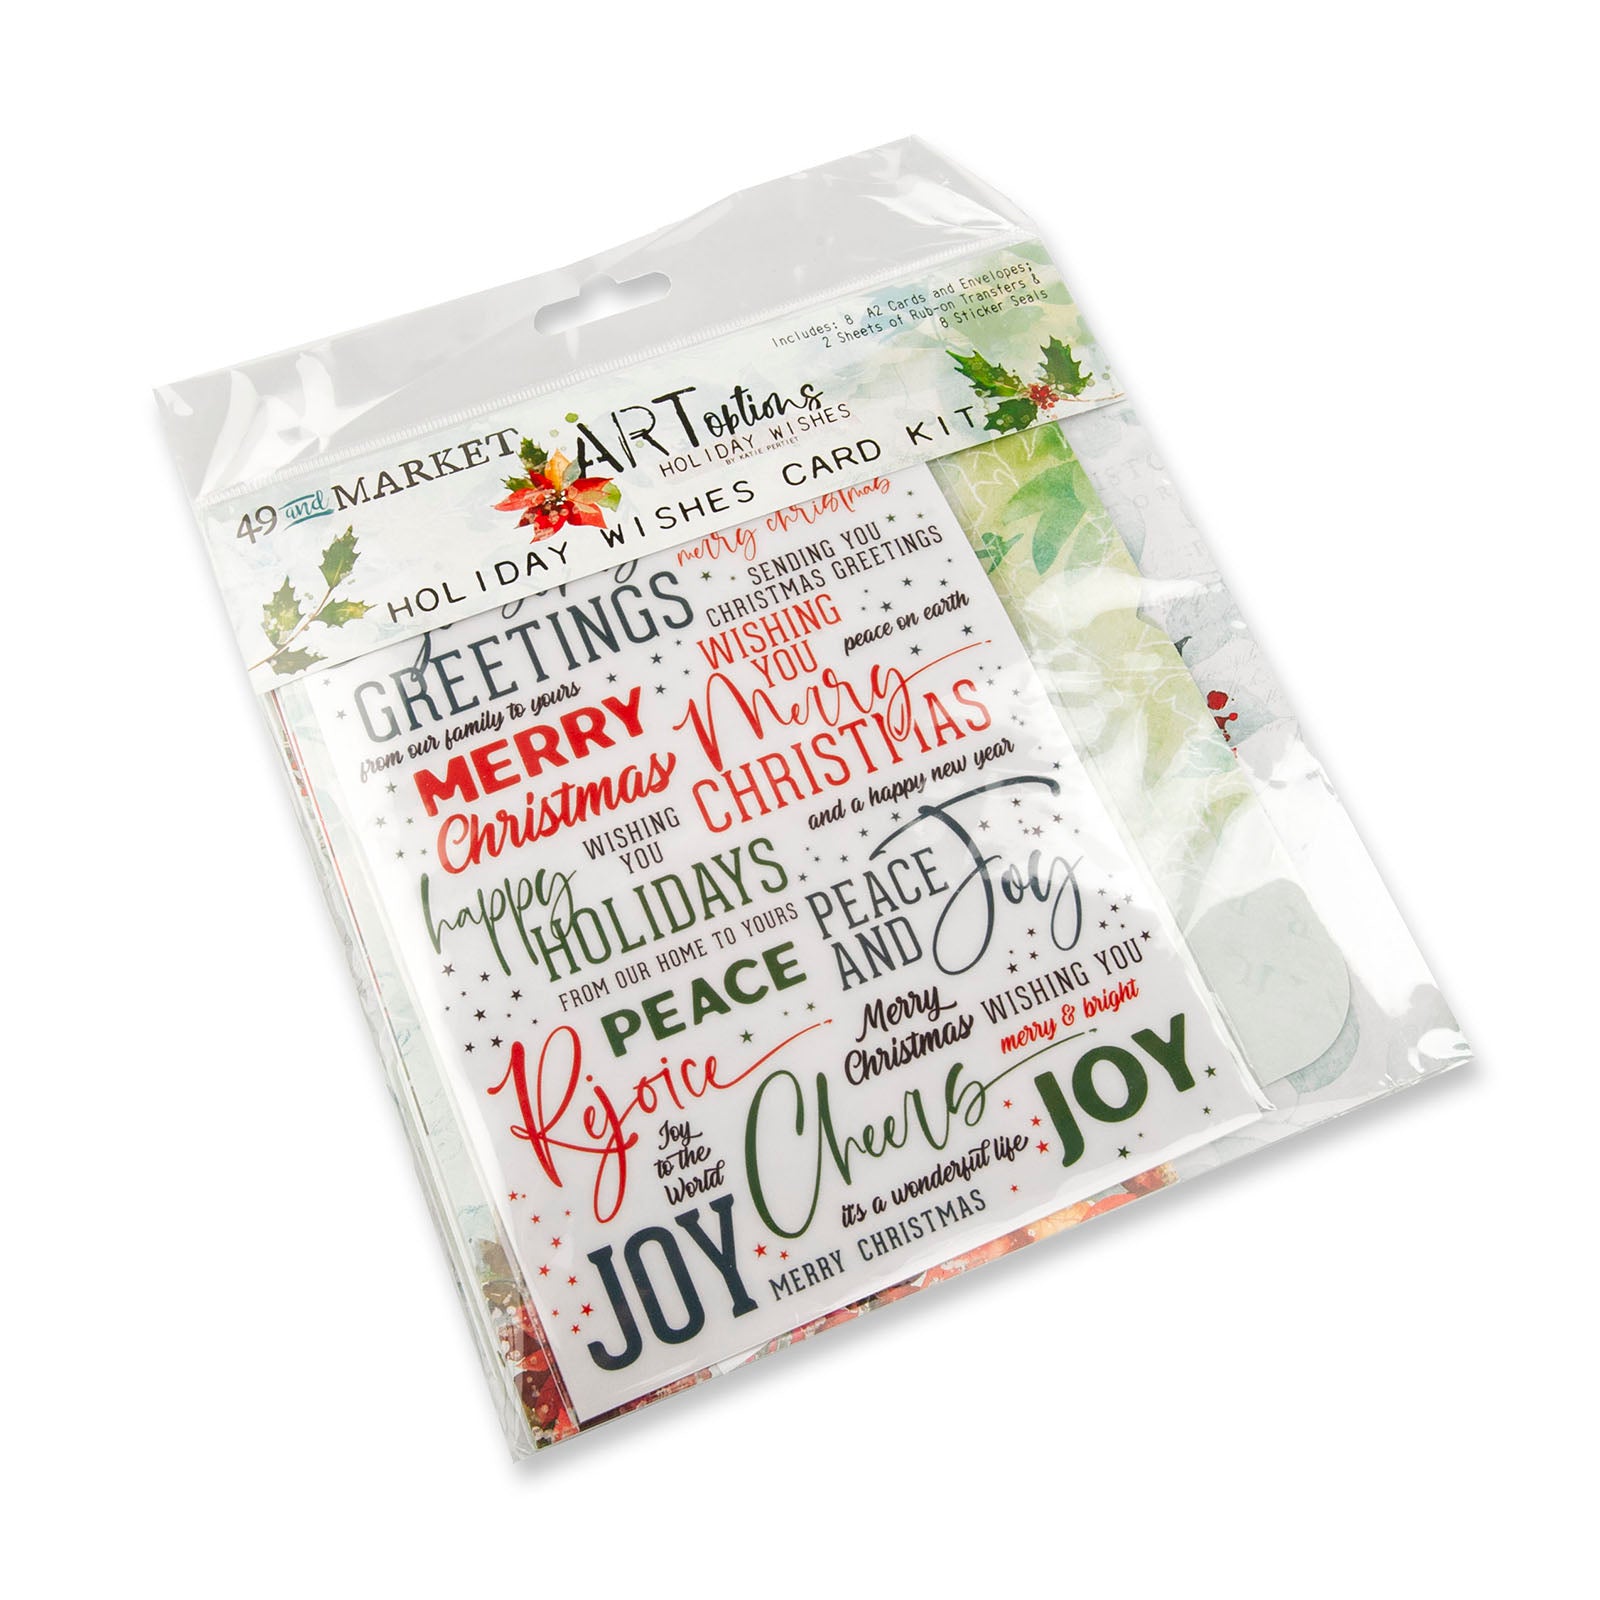 49 and Market Art Options Holiday Wishes - CARD KIT